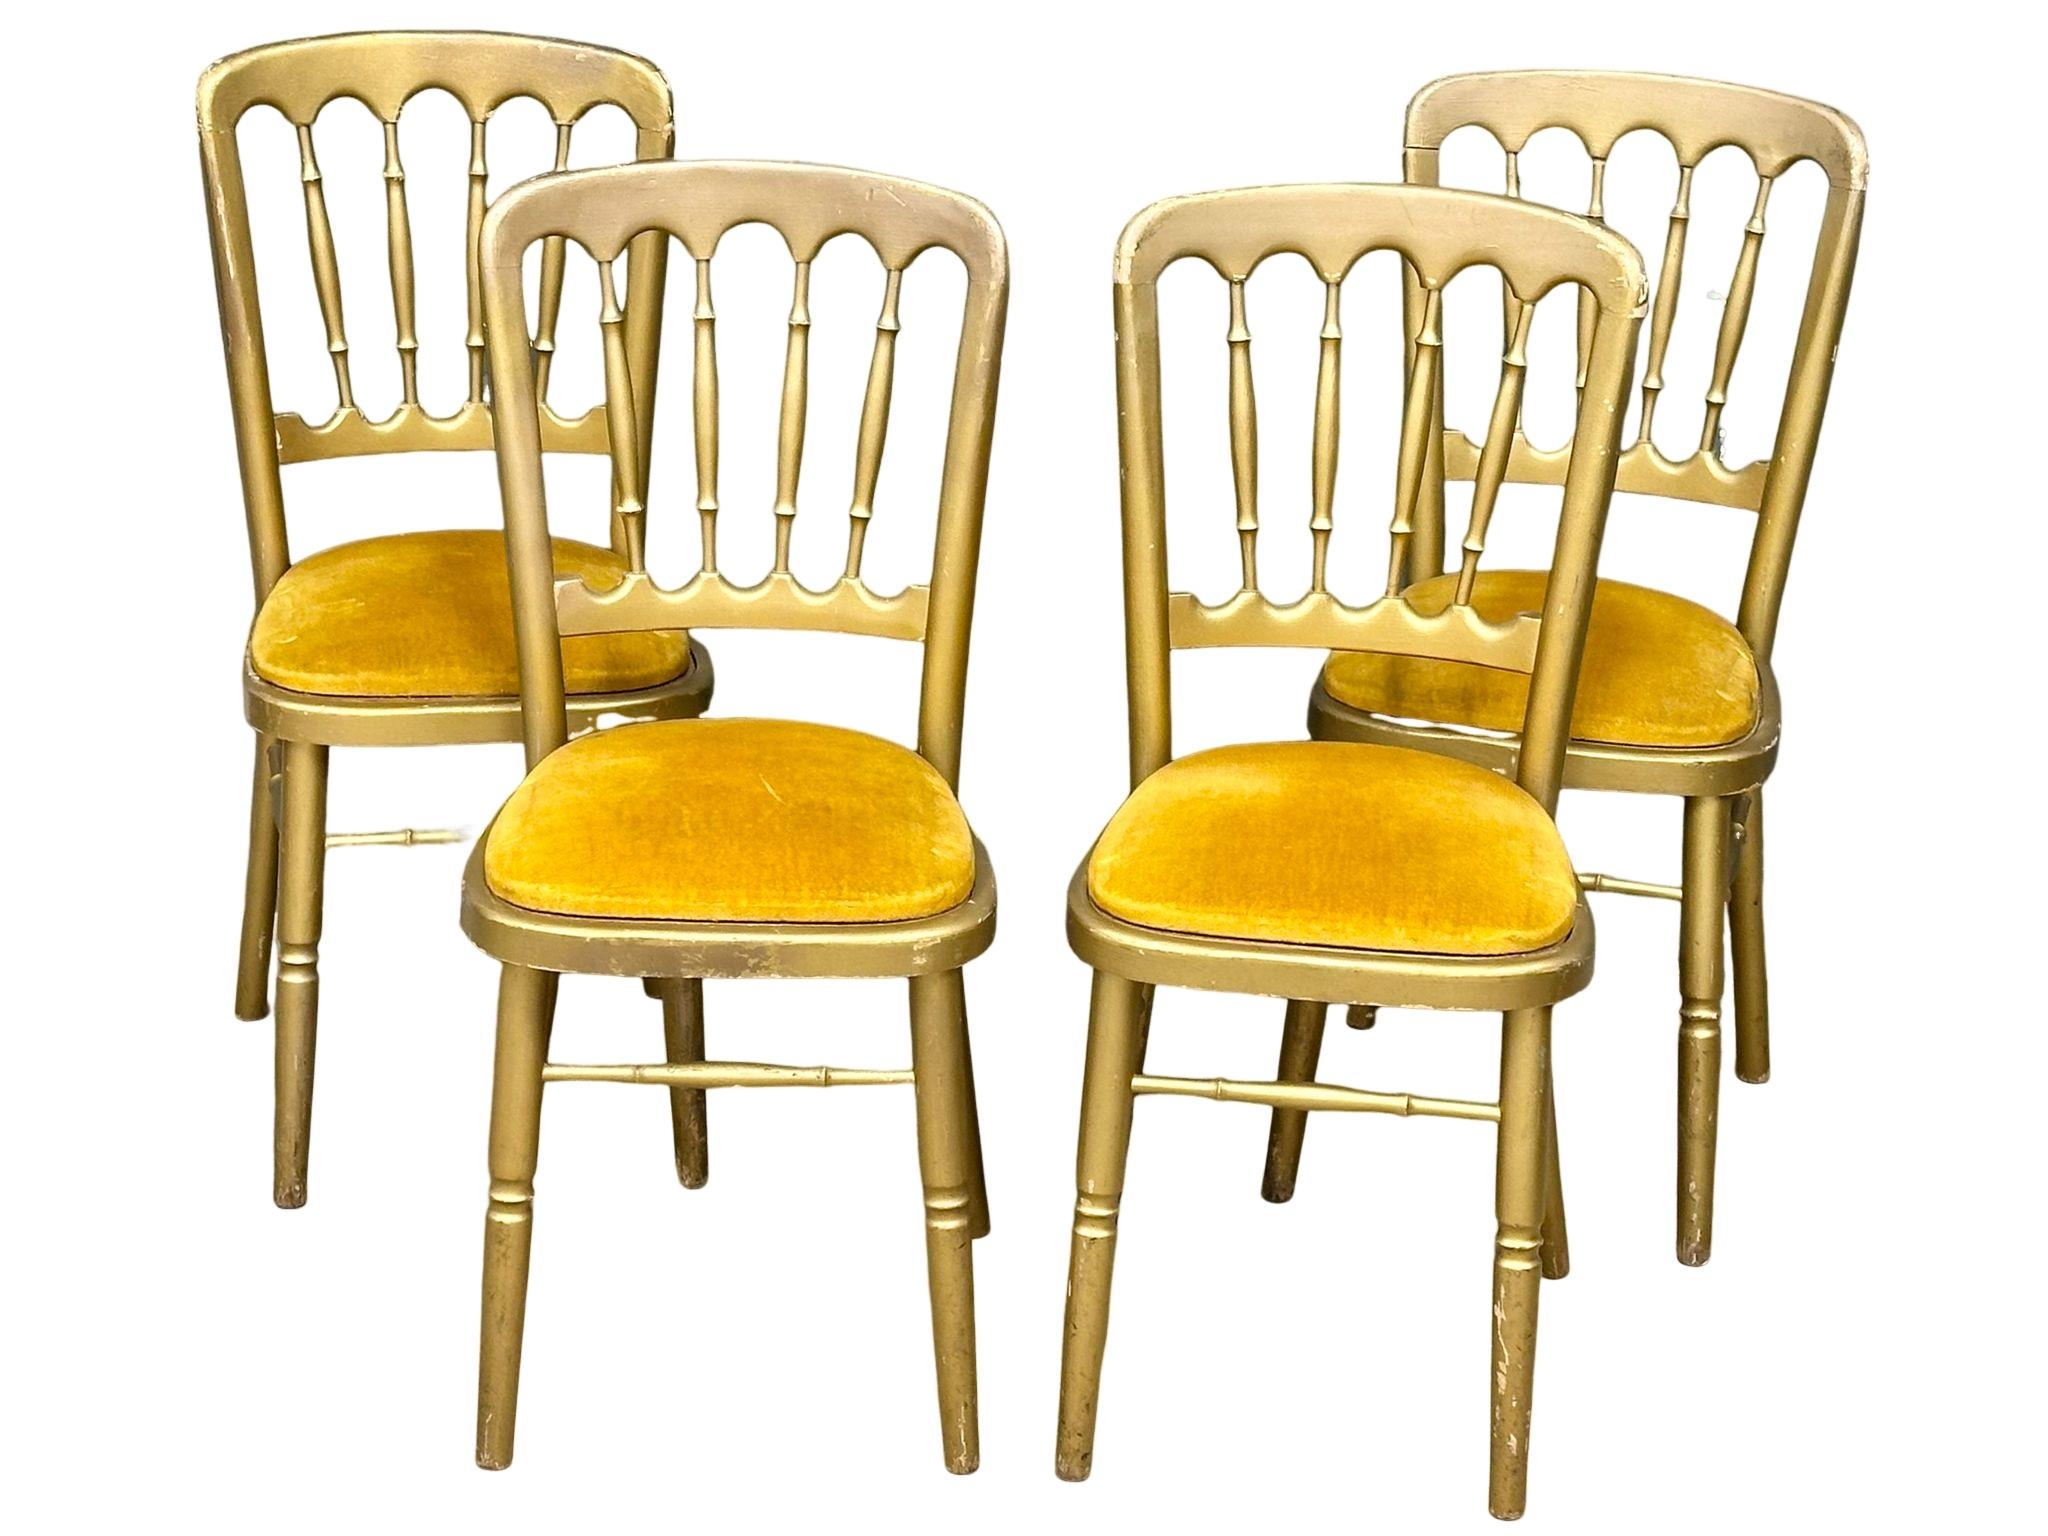 A set of 4 1950's French stacking chairs.